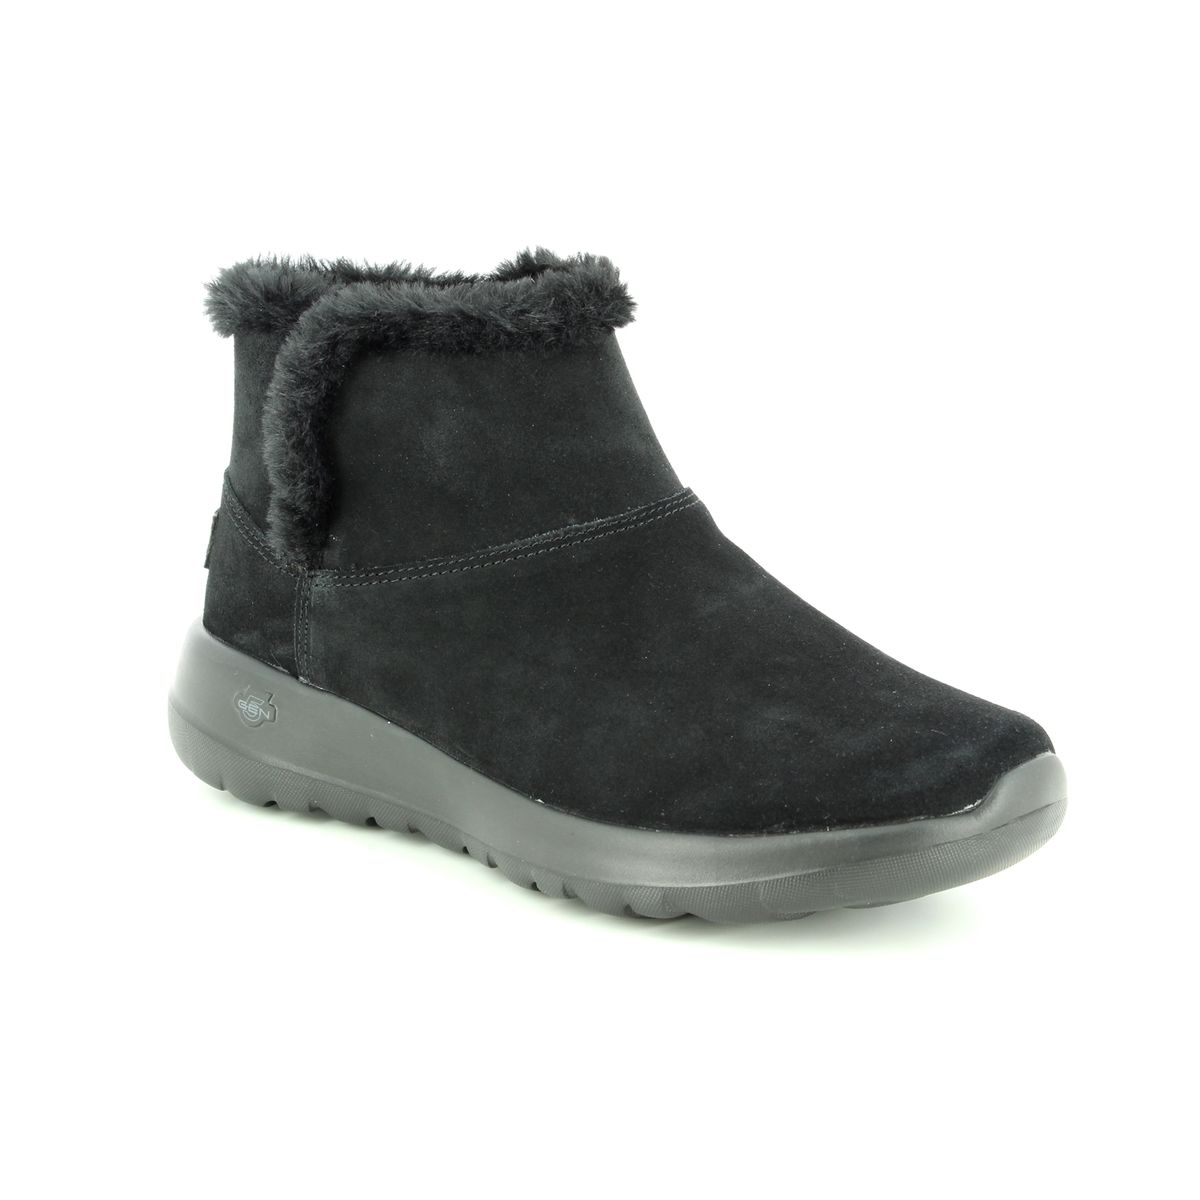 skechers on the go joy ankle boots Sale 